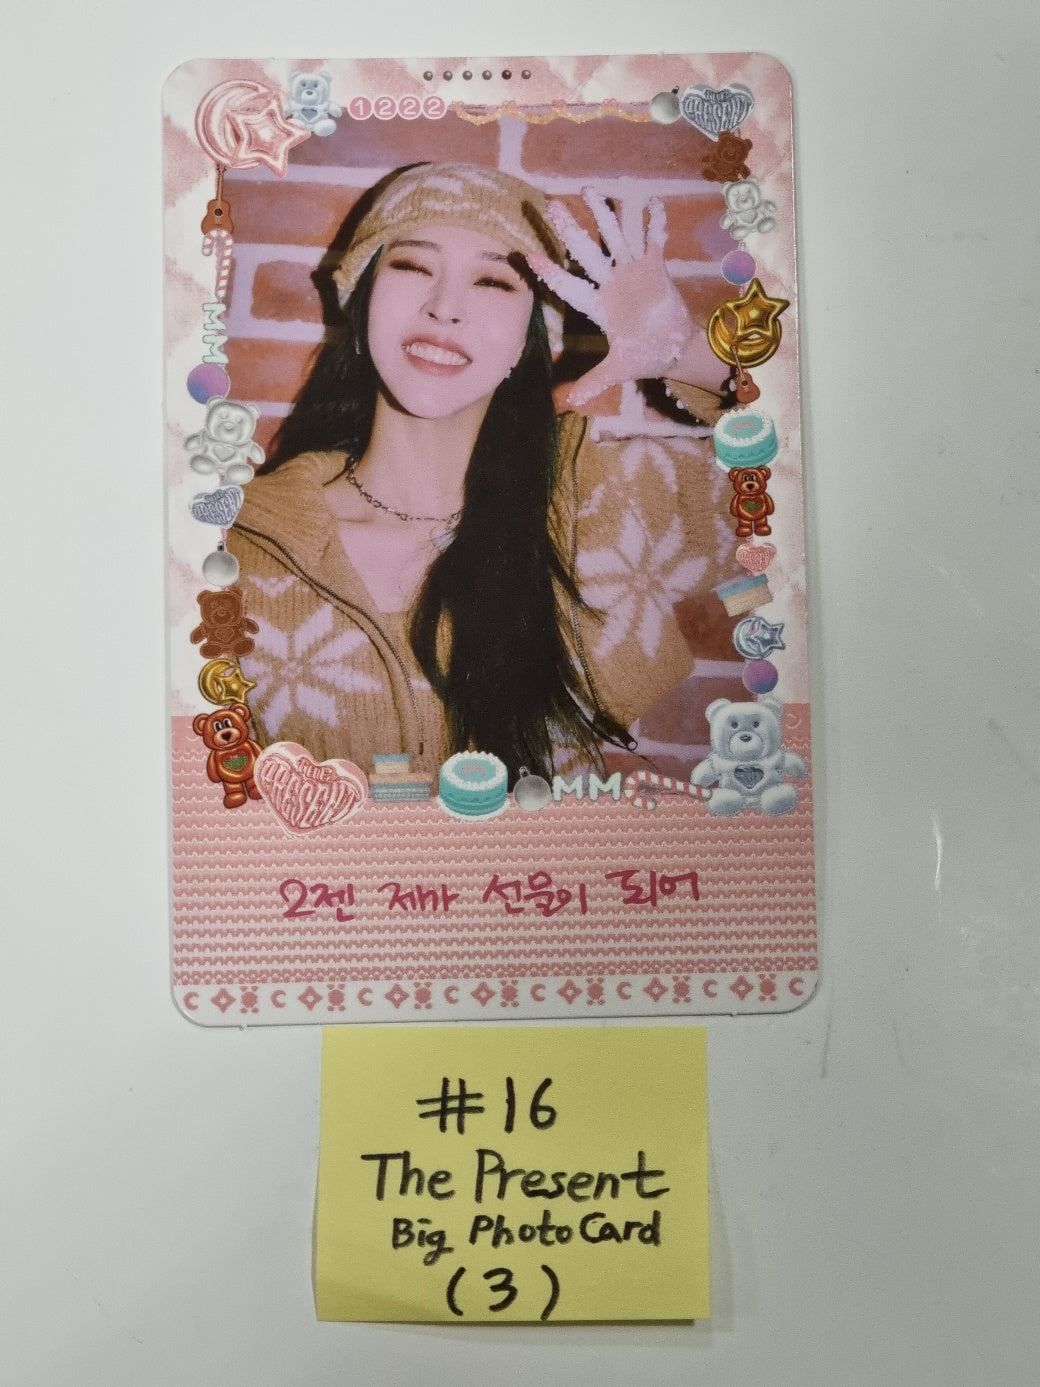 Moon Byul "The Present" - Official Photocard, Big Photocards